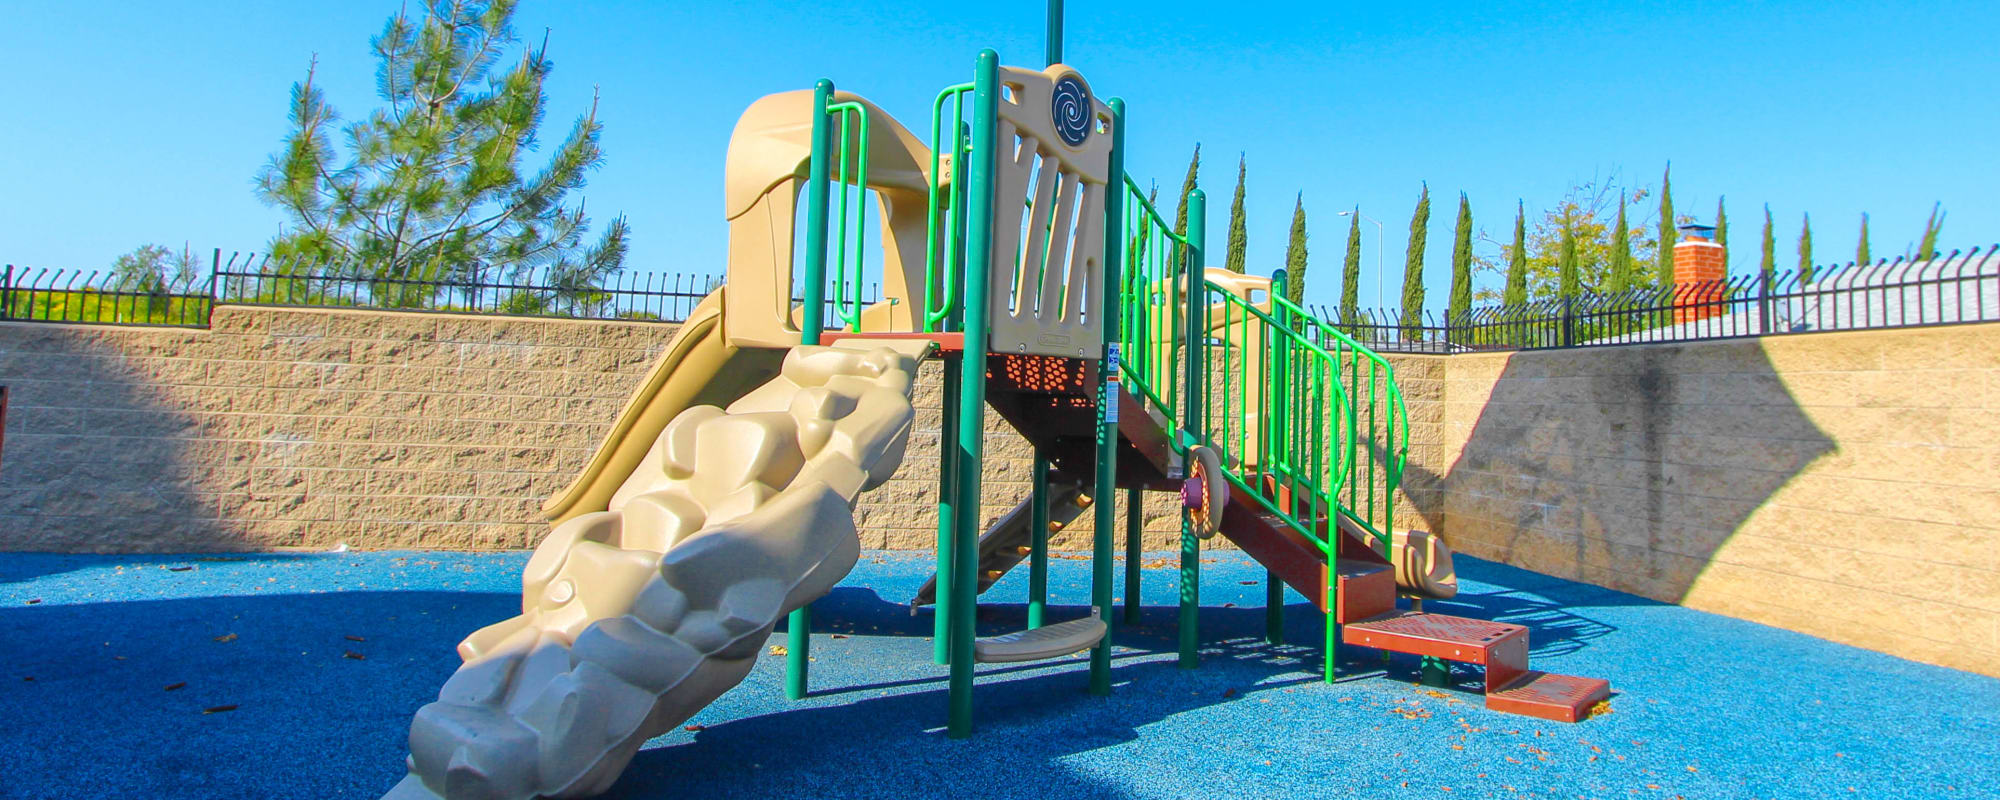 Playground at Prospect View in Santee, California